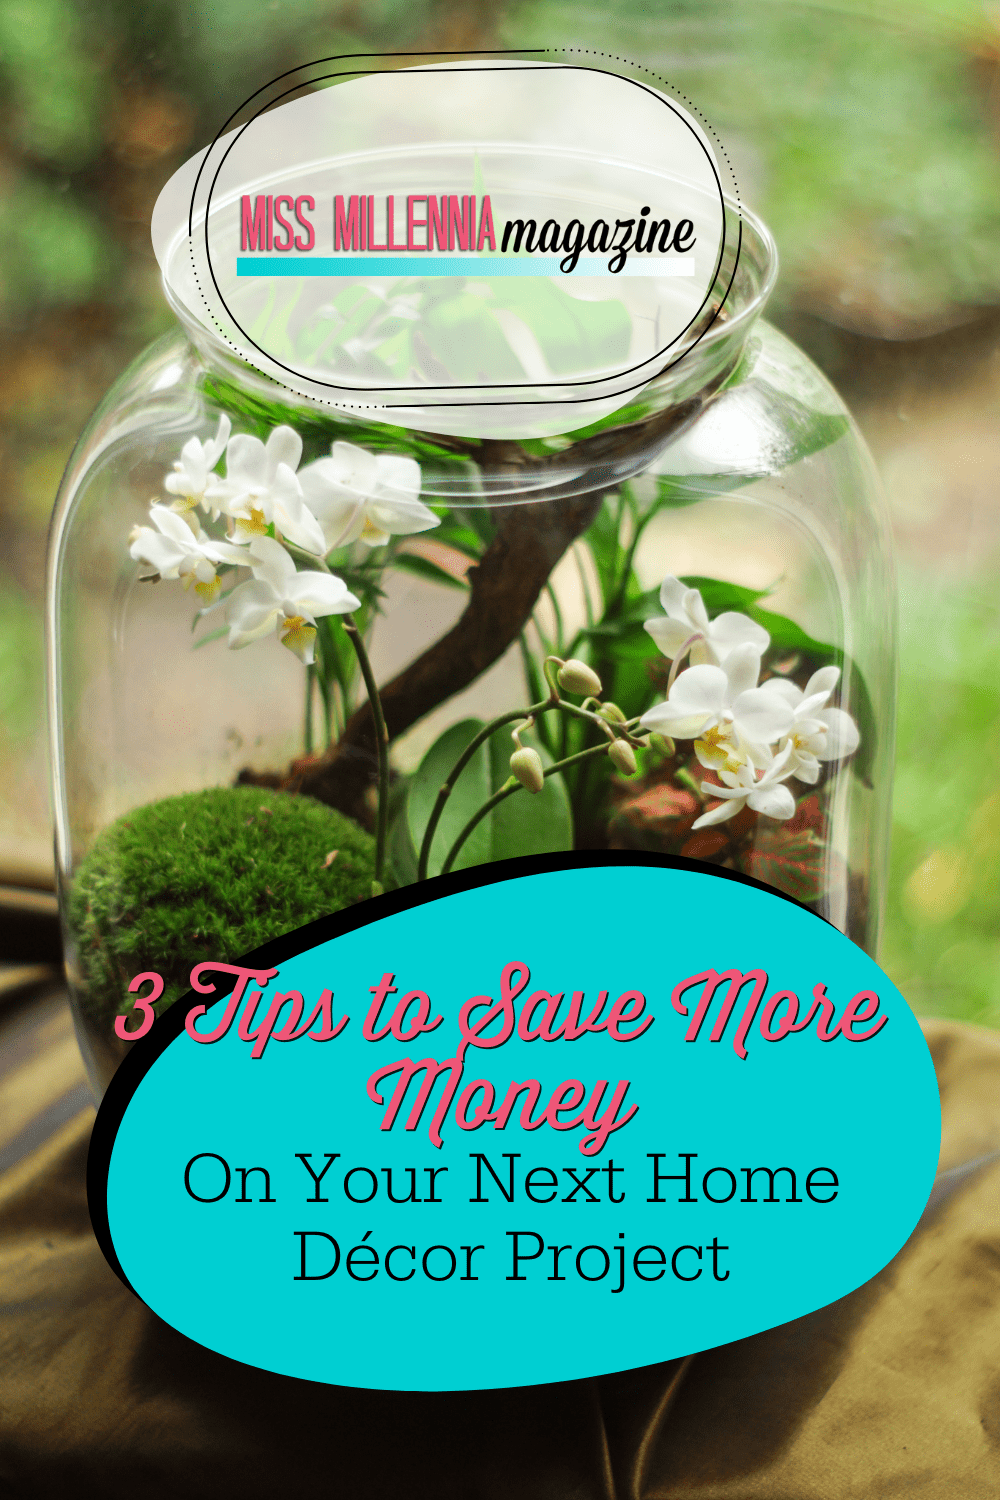 3 Tips to Save More Money On Your Next Home Décor Project